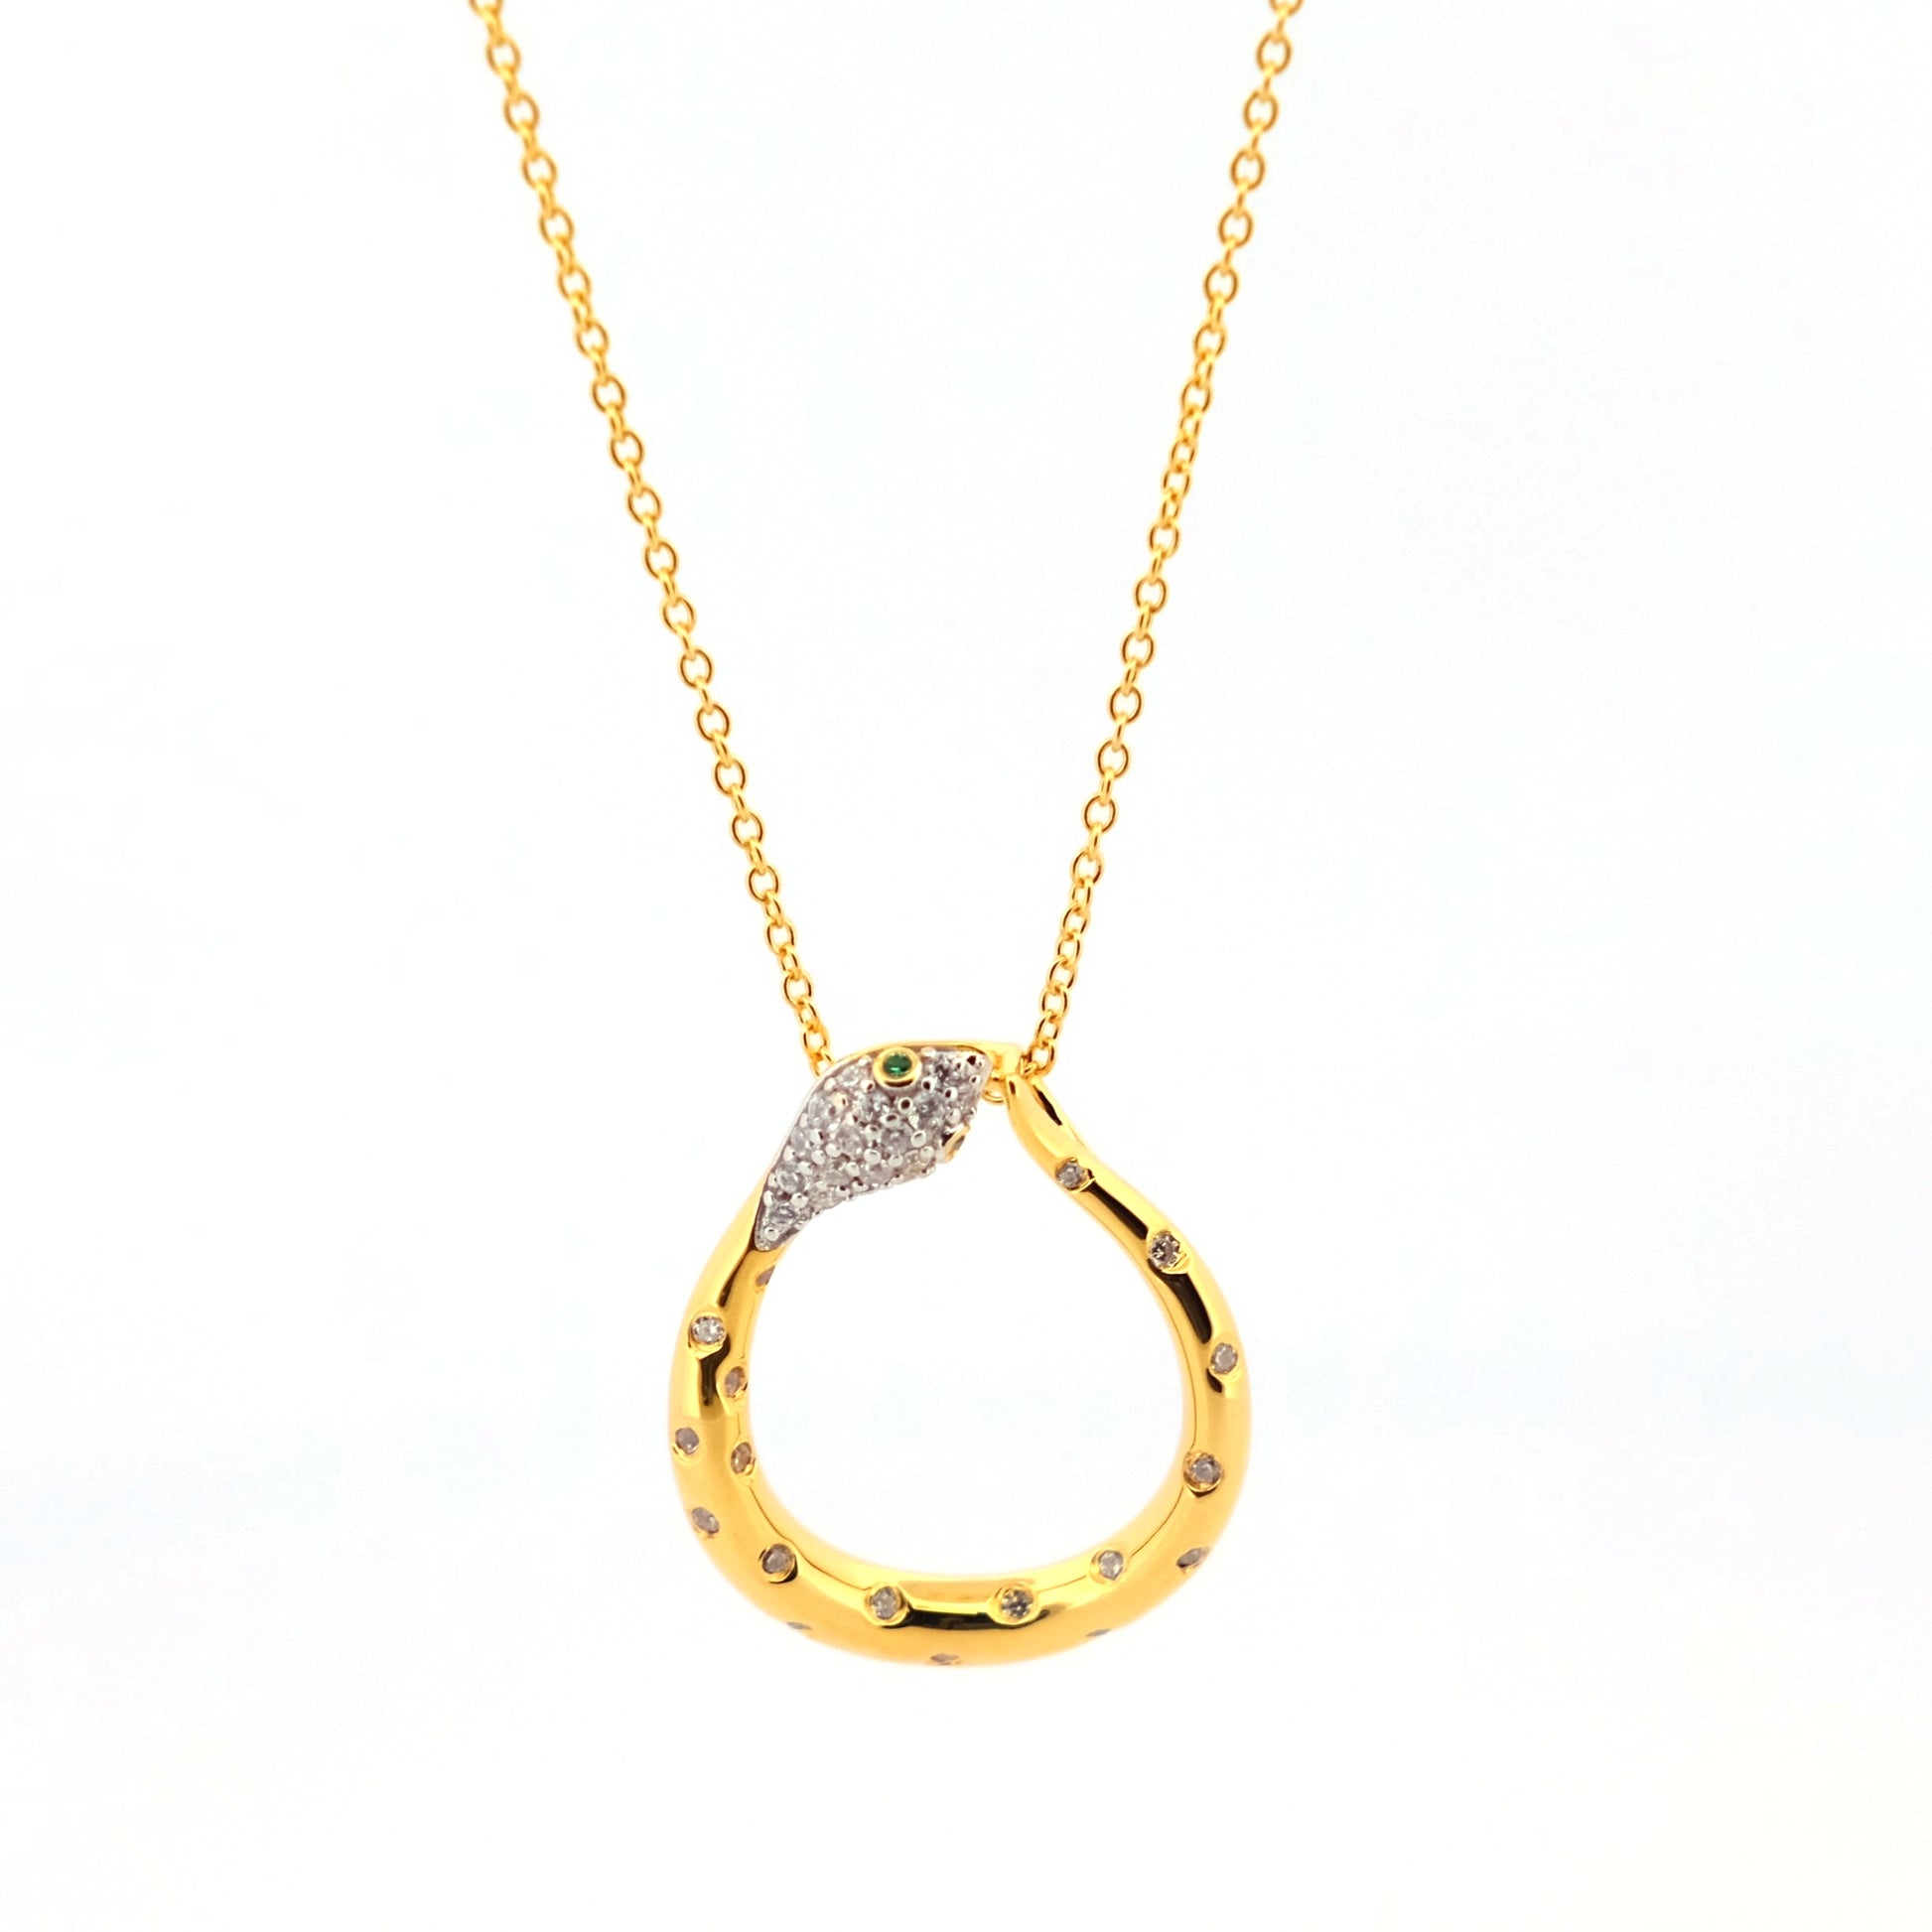 Snake Necklace | Marcello Pane | Luby 